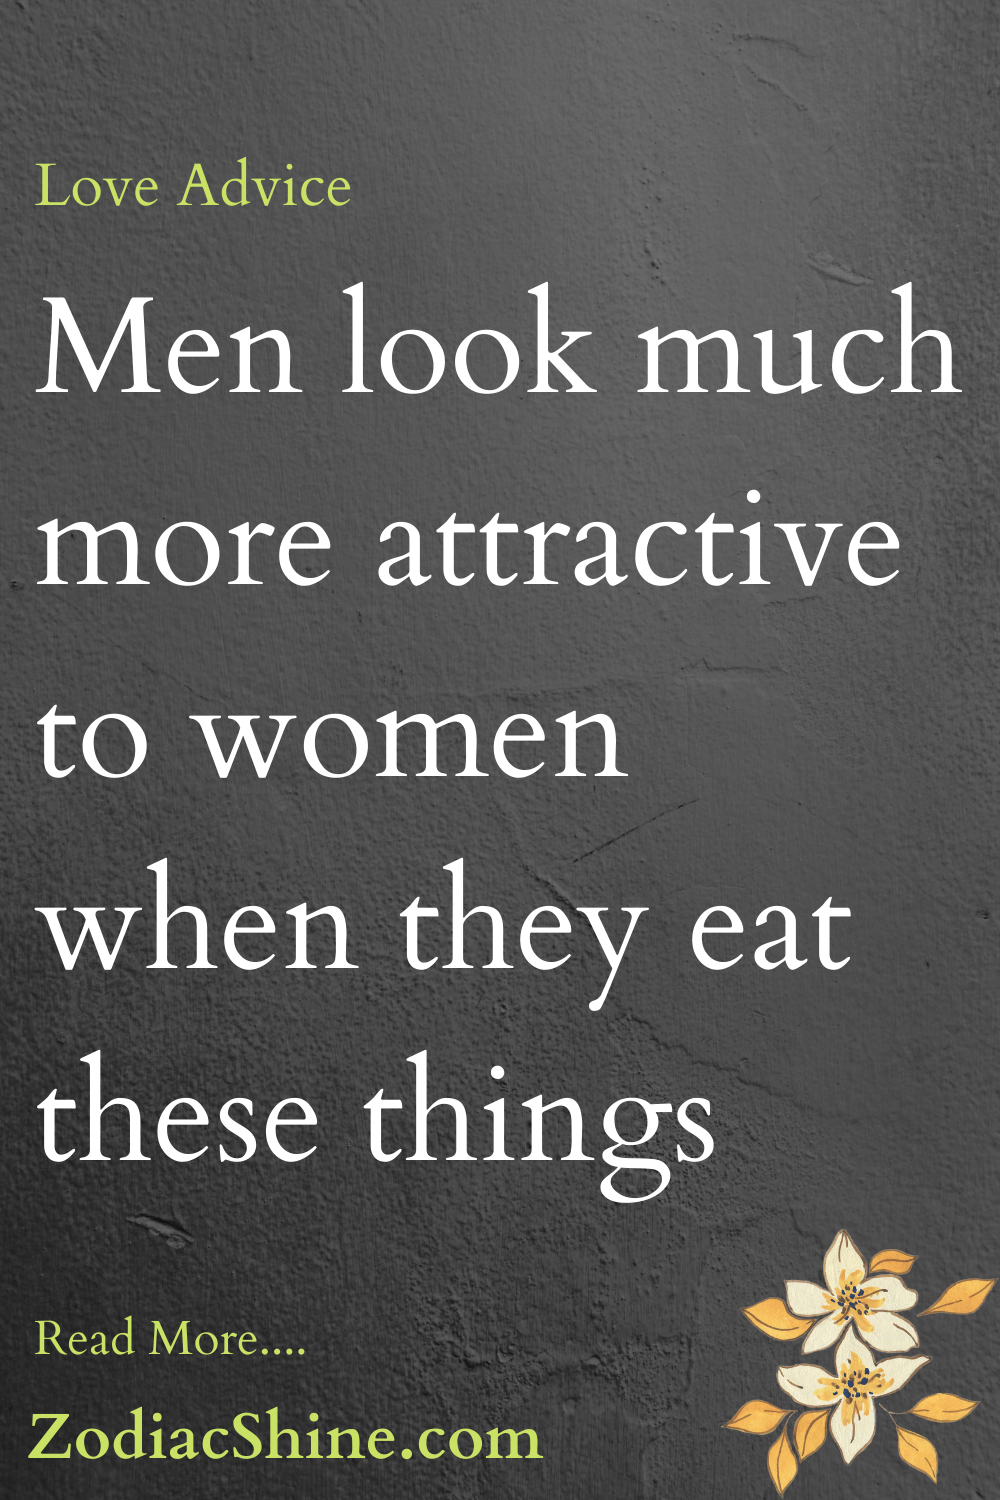 Men look much more attractive to women when they eat these things